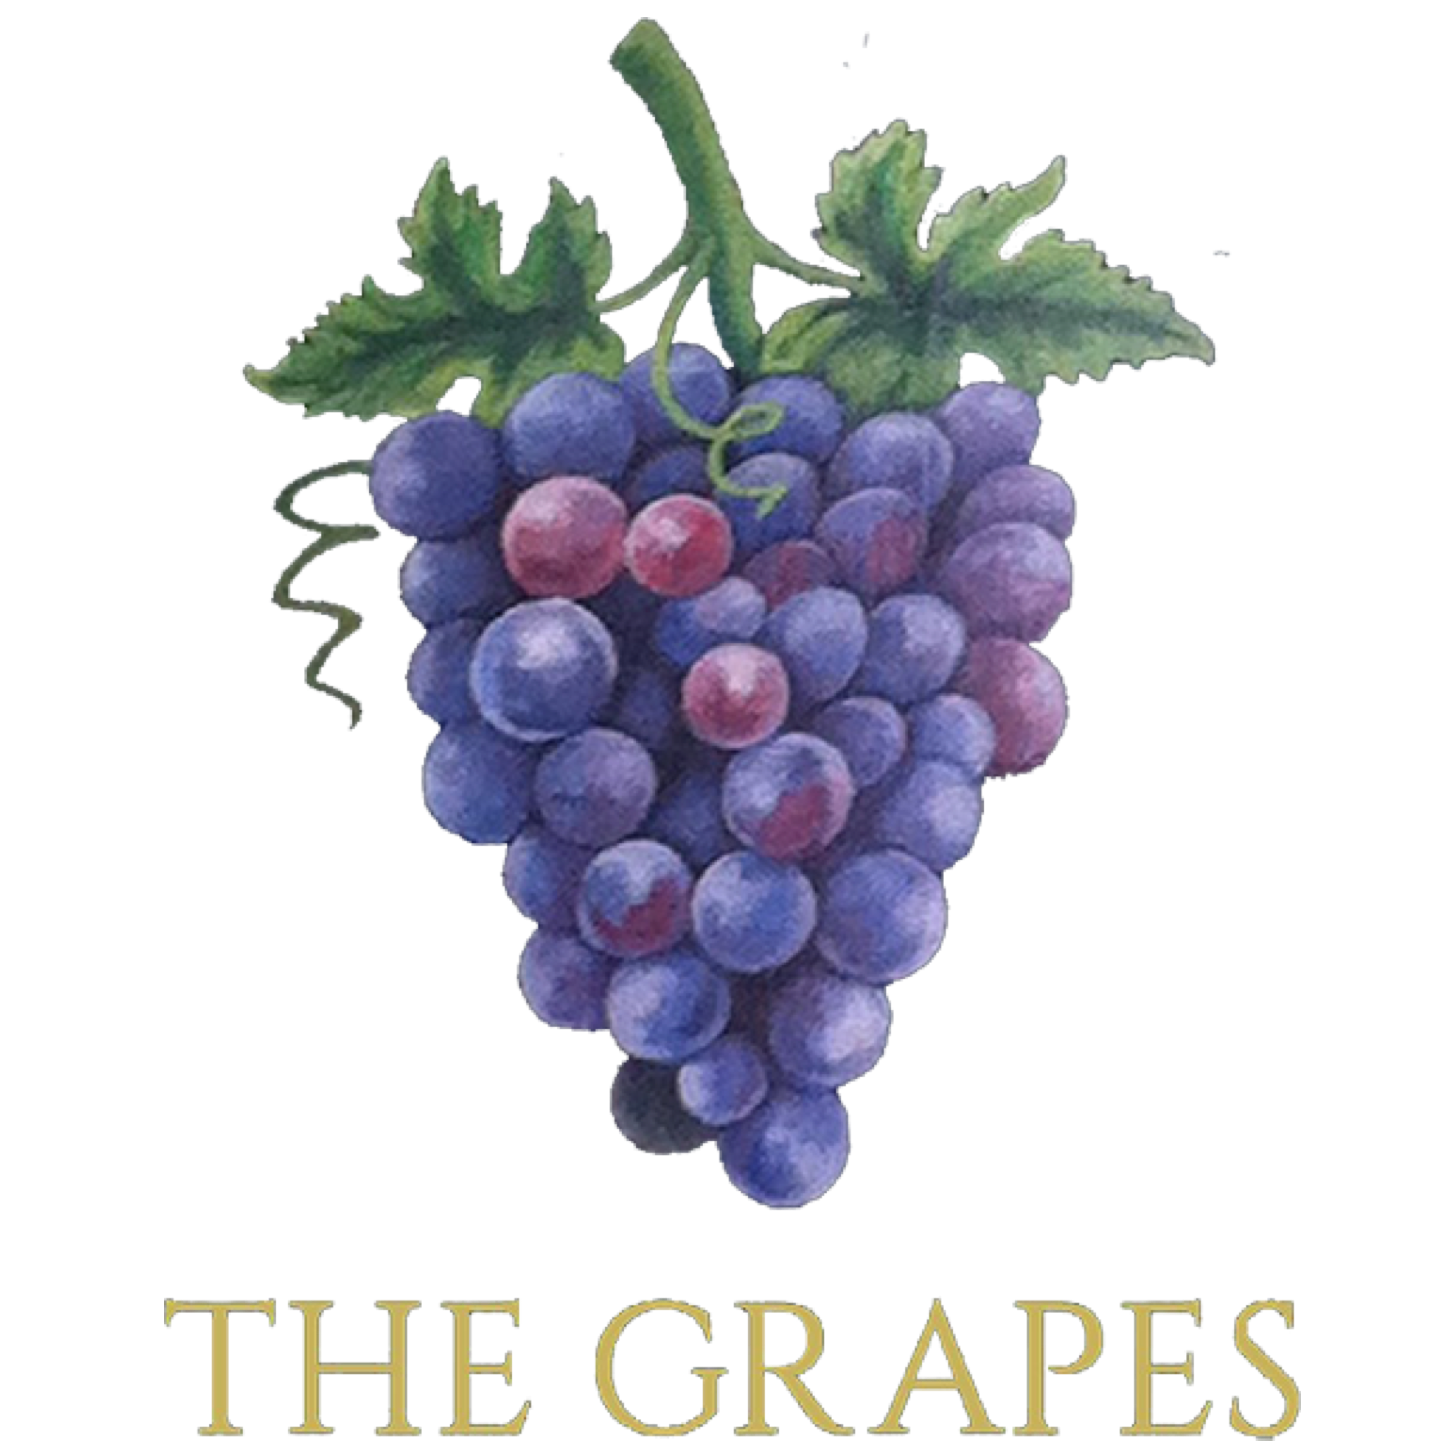 The Grapes | Craft Beer | Artisanal Pizza | Pub & Restaurant in Oxford